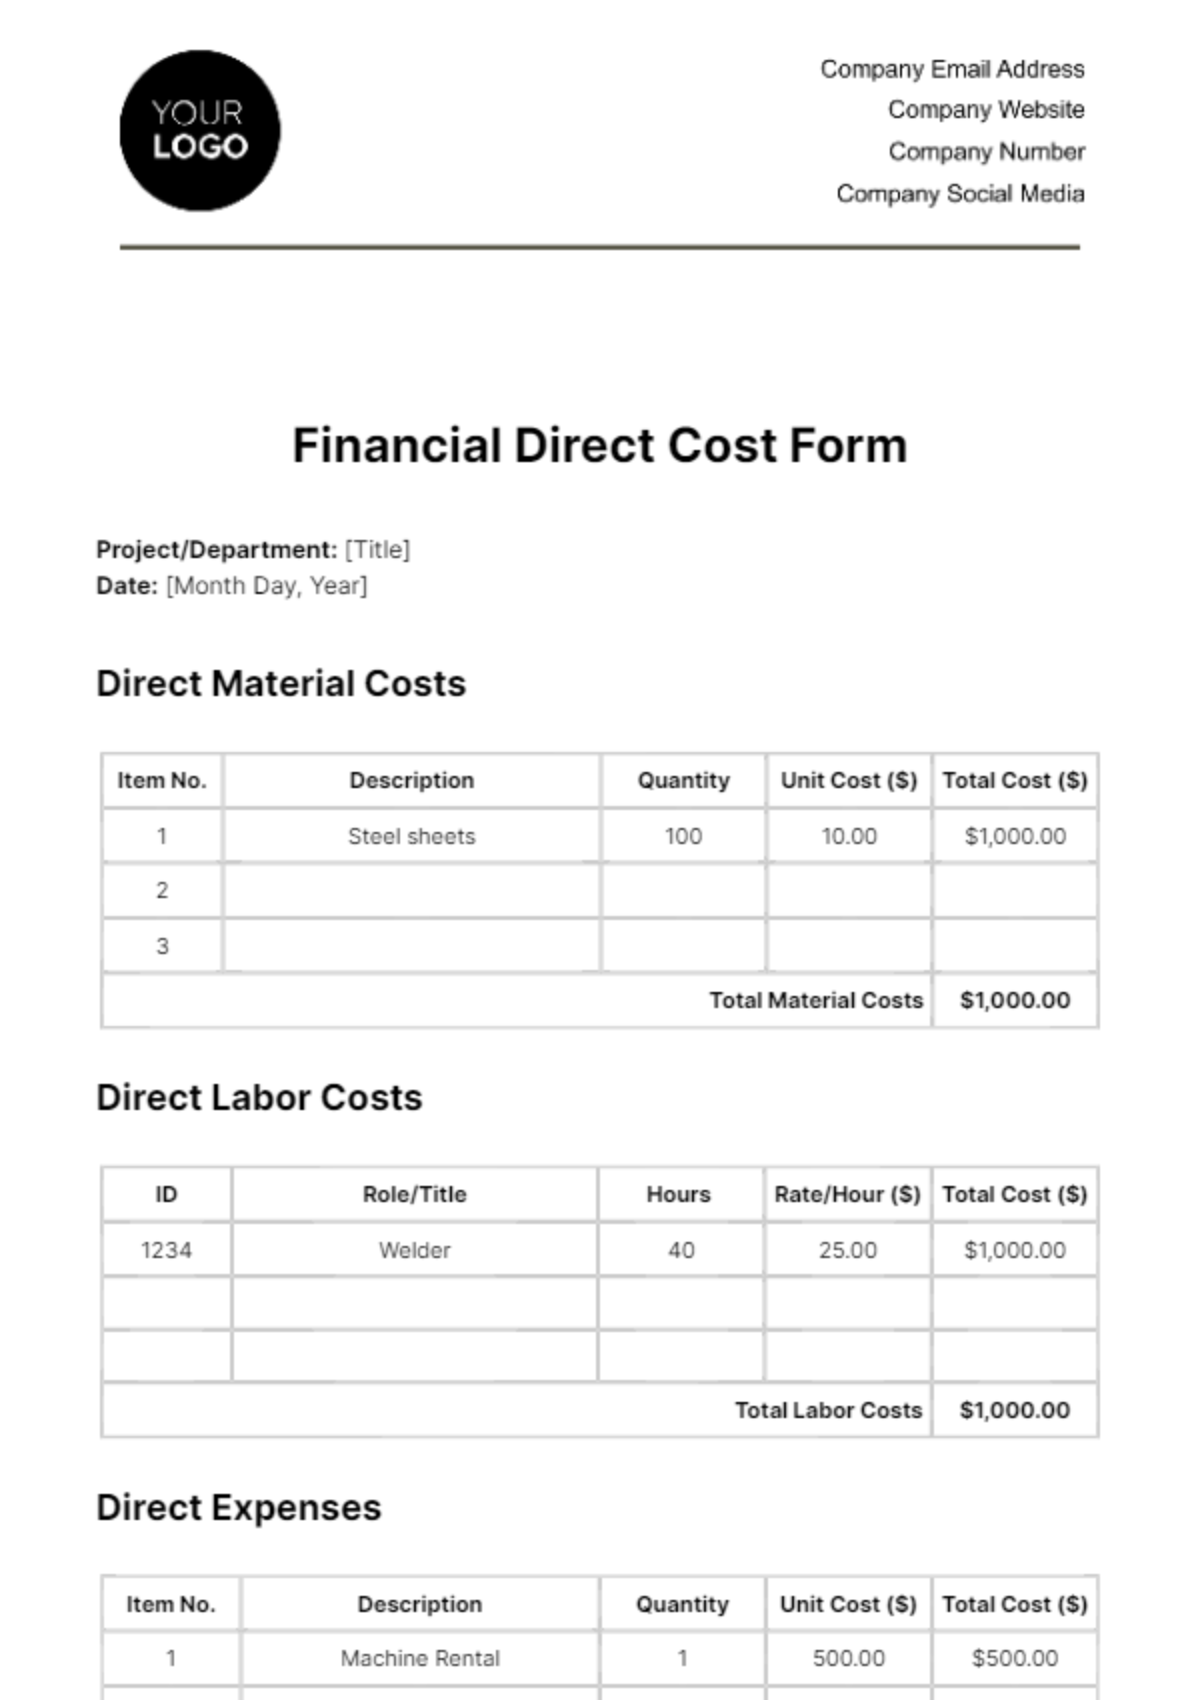 Free Financial Direct Cost Form Template